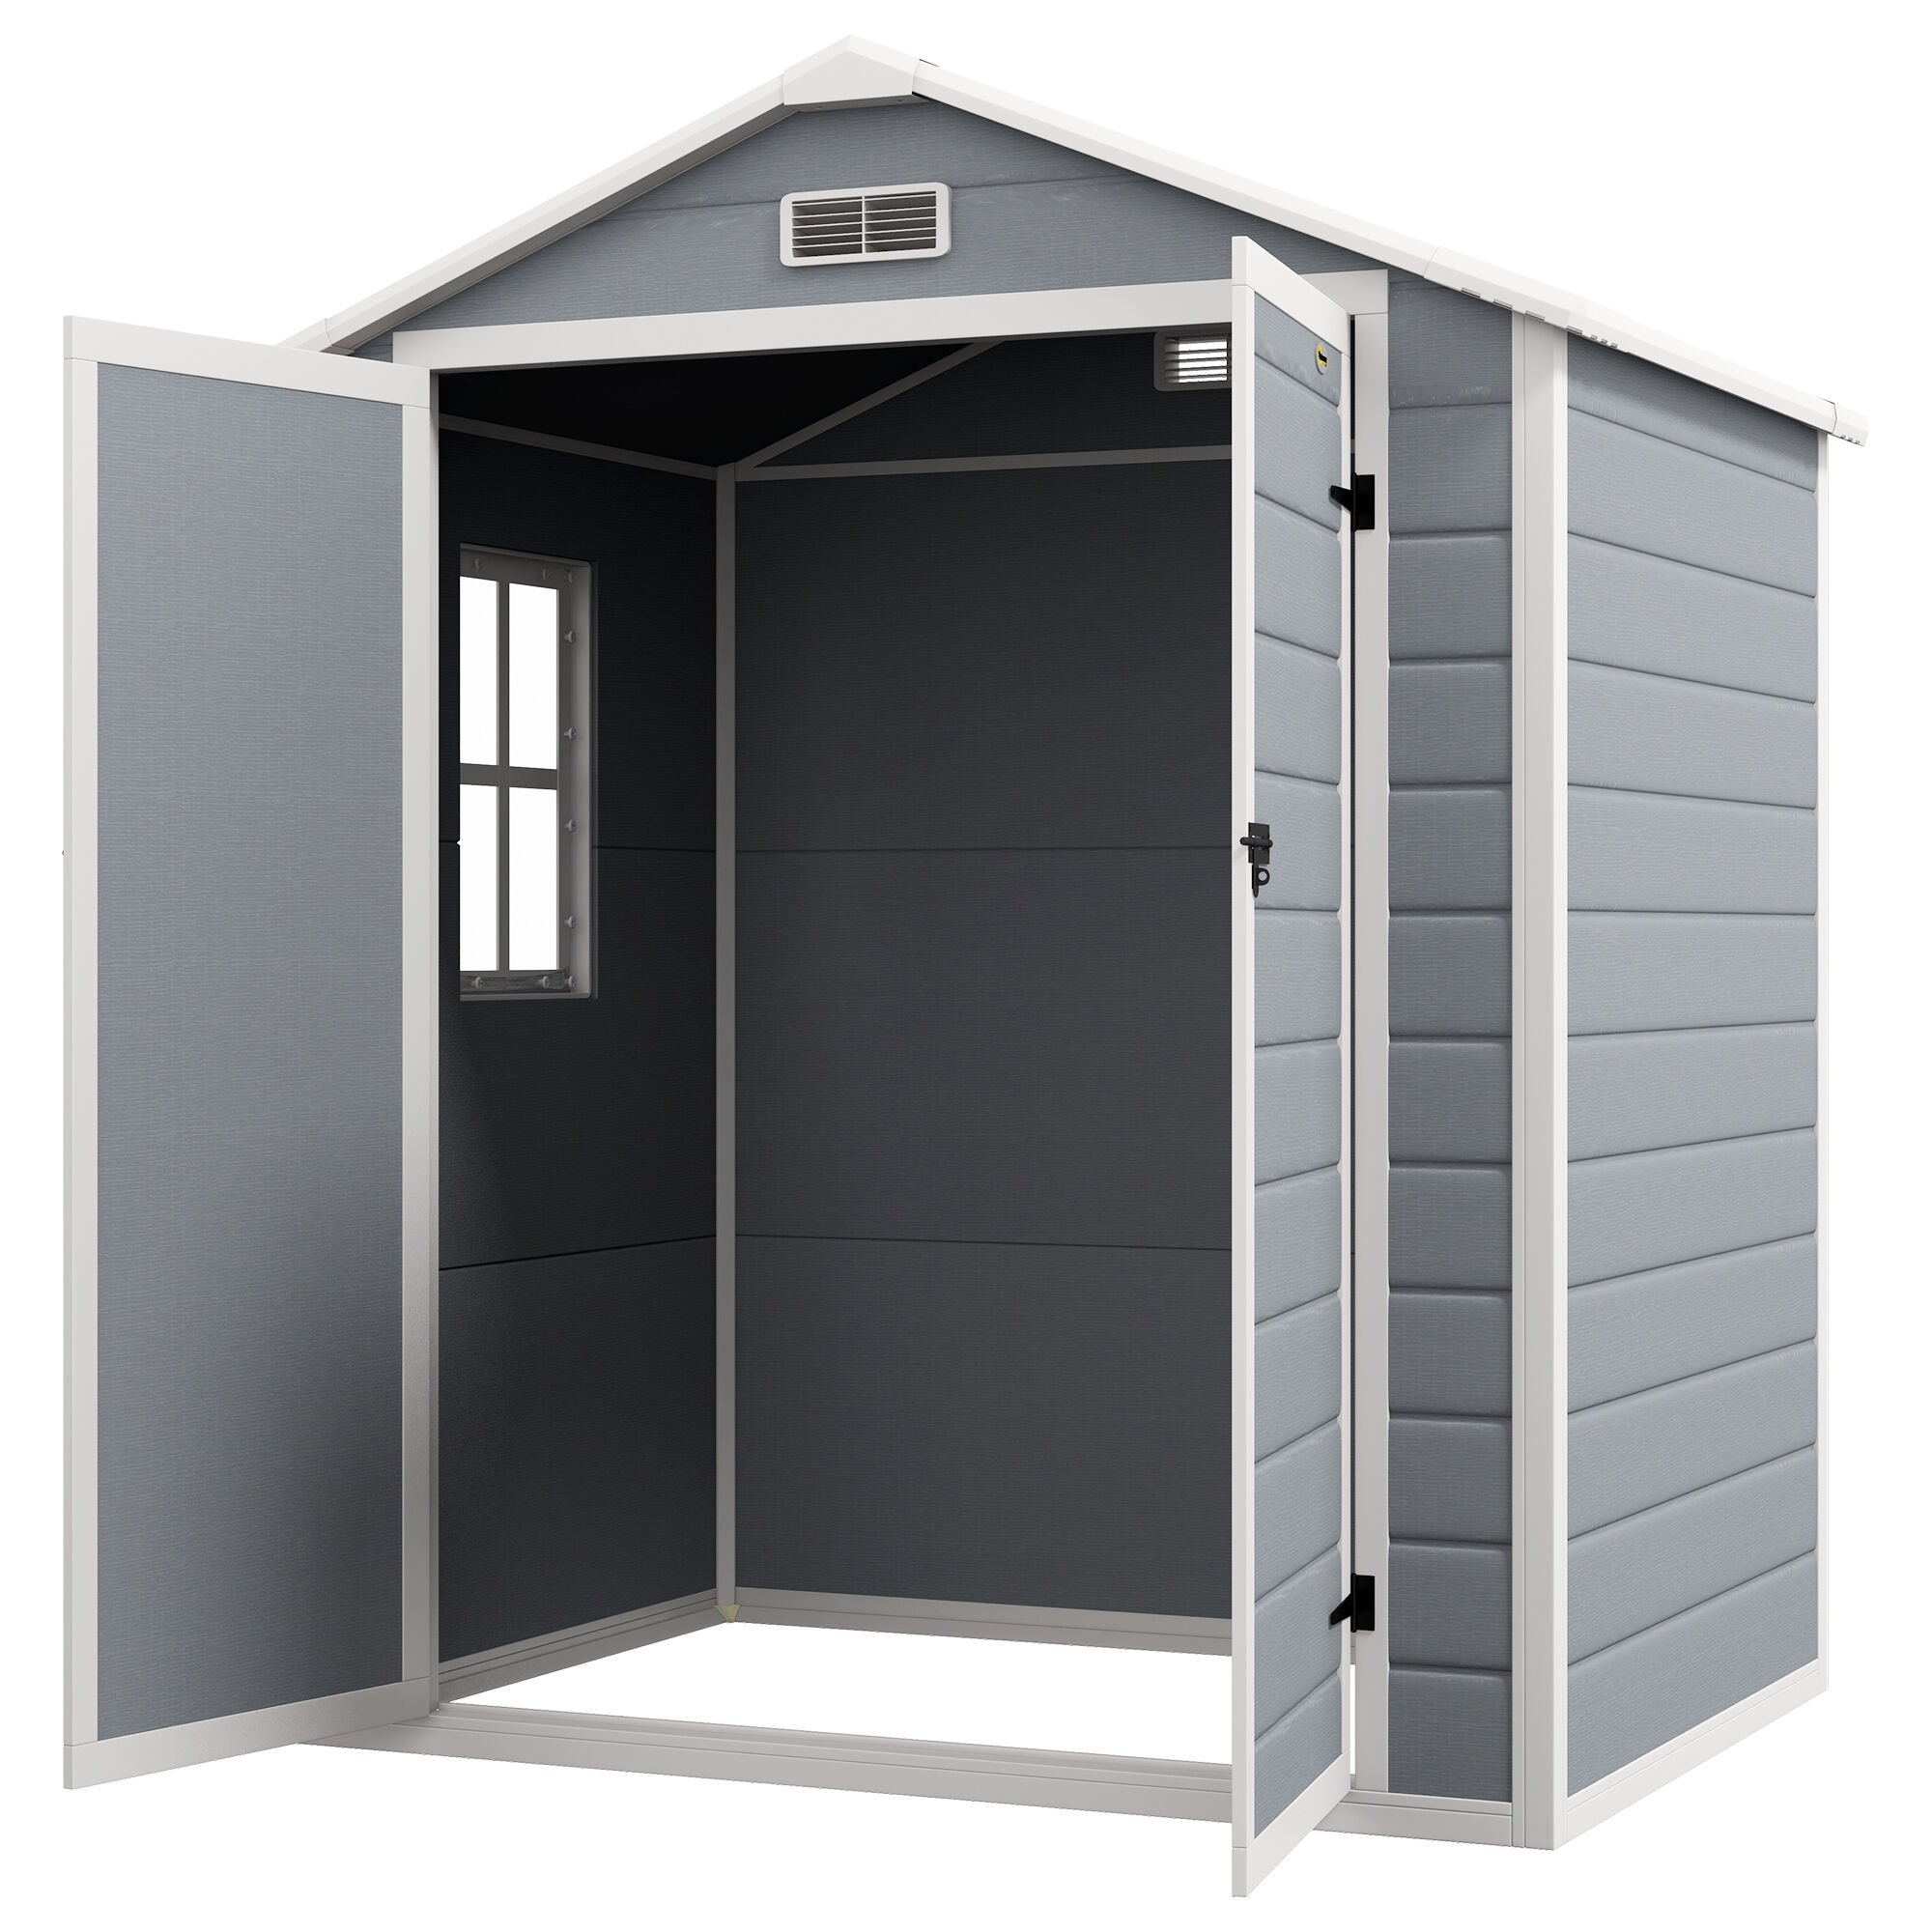 Outsunny Outdoor Storage Shed, 6 x 4.5FT Garden Shed with Double Lockable  Doors, Vent and Window, Plastic Utility Tool Shed for Backyard, Patio, 